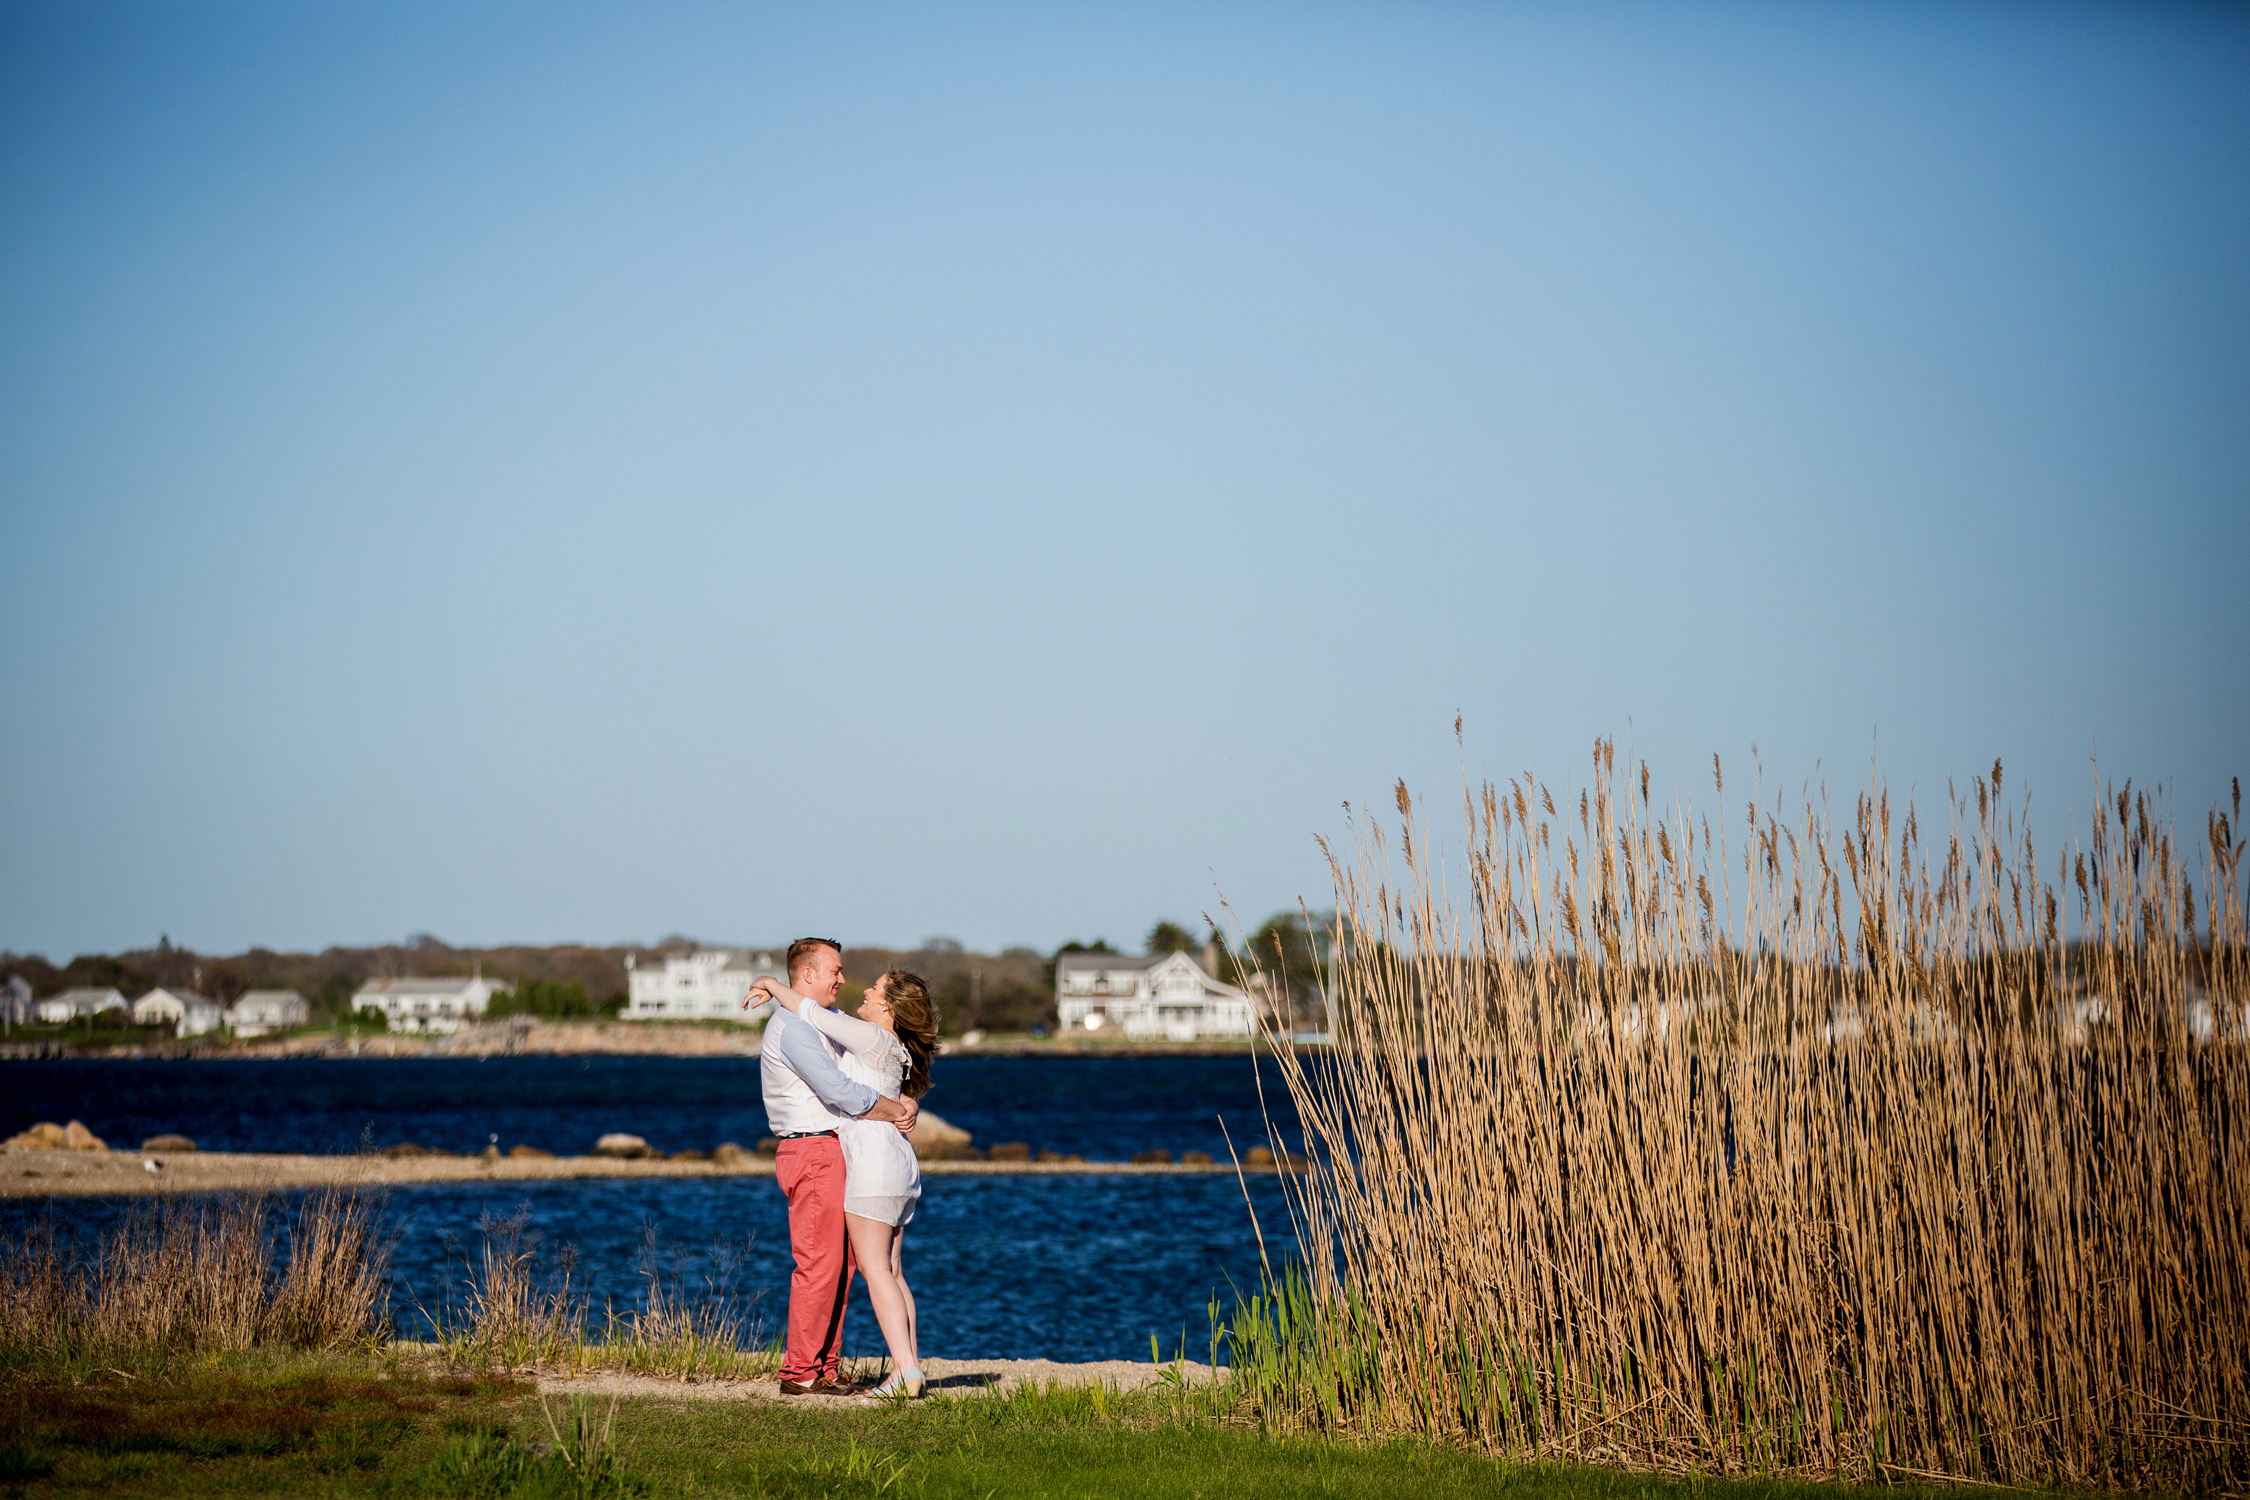 Tracey Buyce Engagement Photography41.jpg